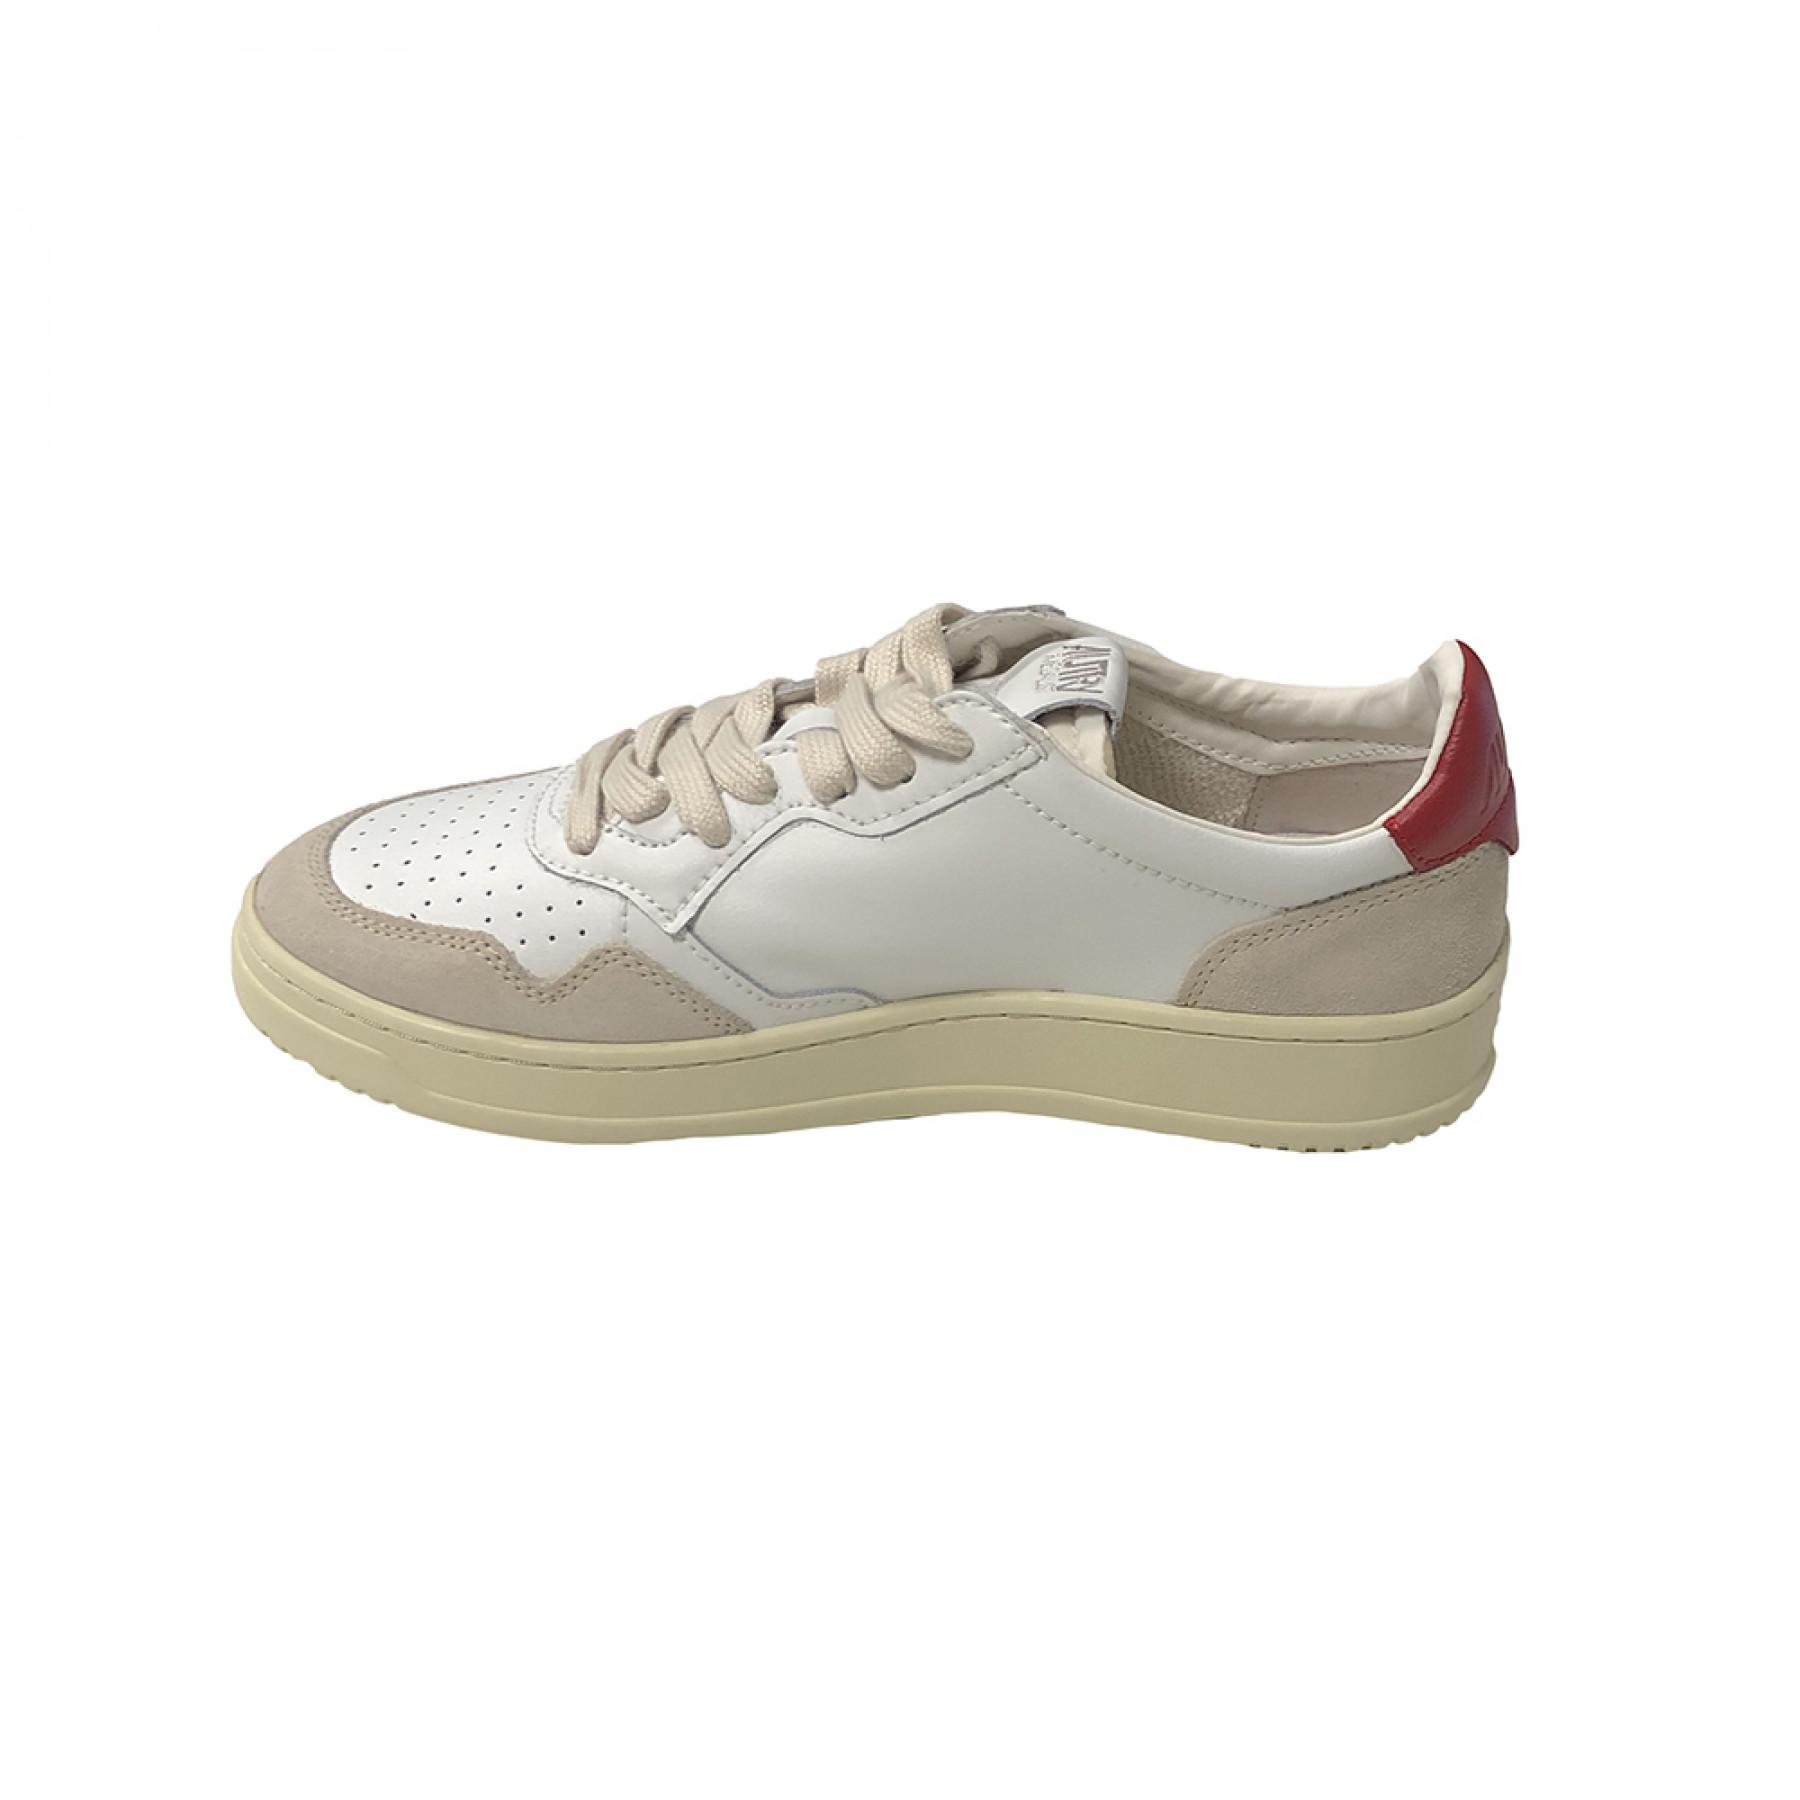 Trenerzy Autry Medalist LS29 Leather/Suede White/Red